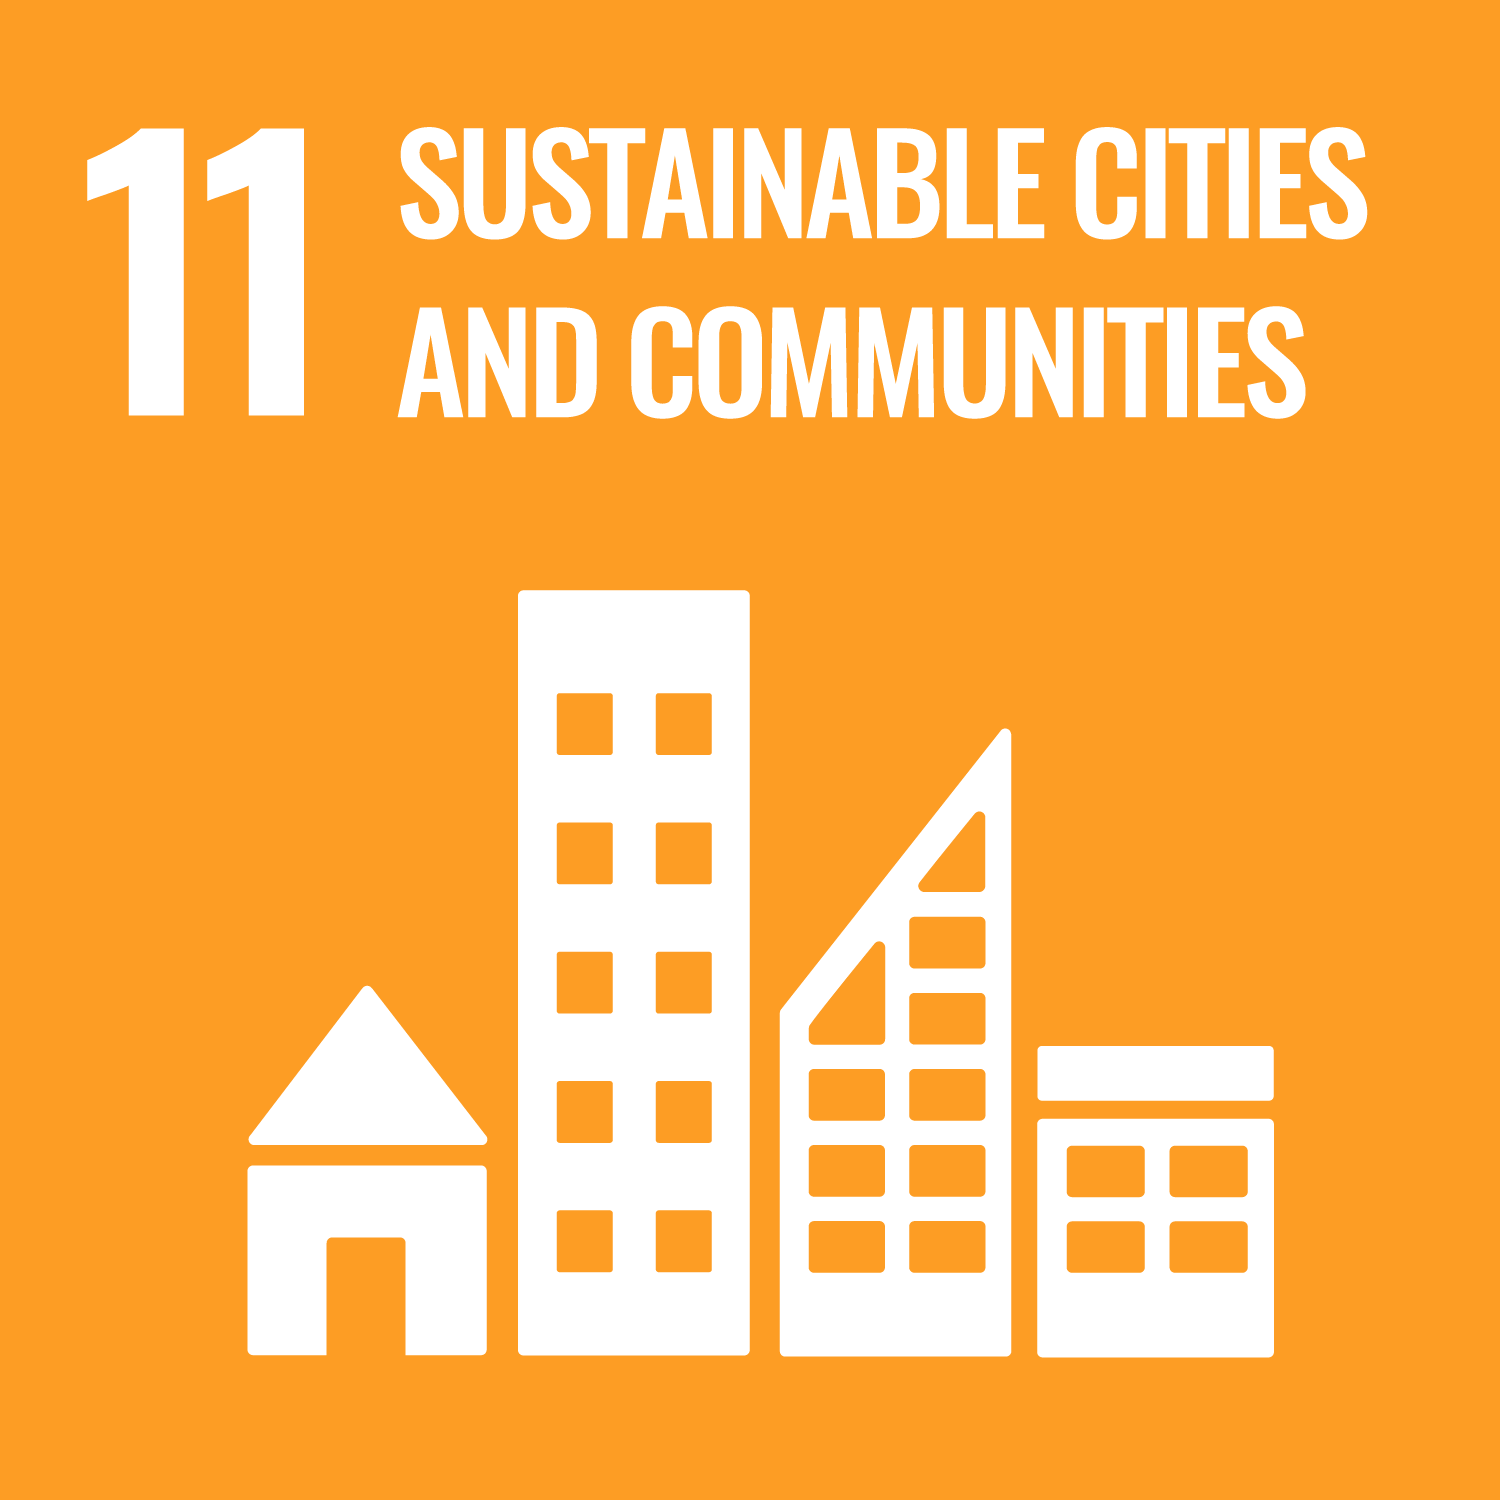 Goals 11 Make cities and human settlements inclusive, safe, resilient and sustainable